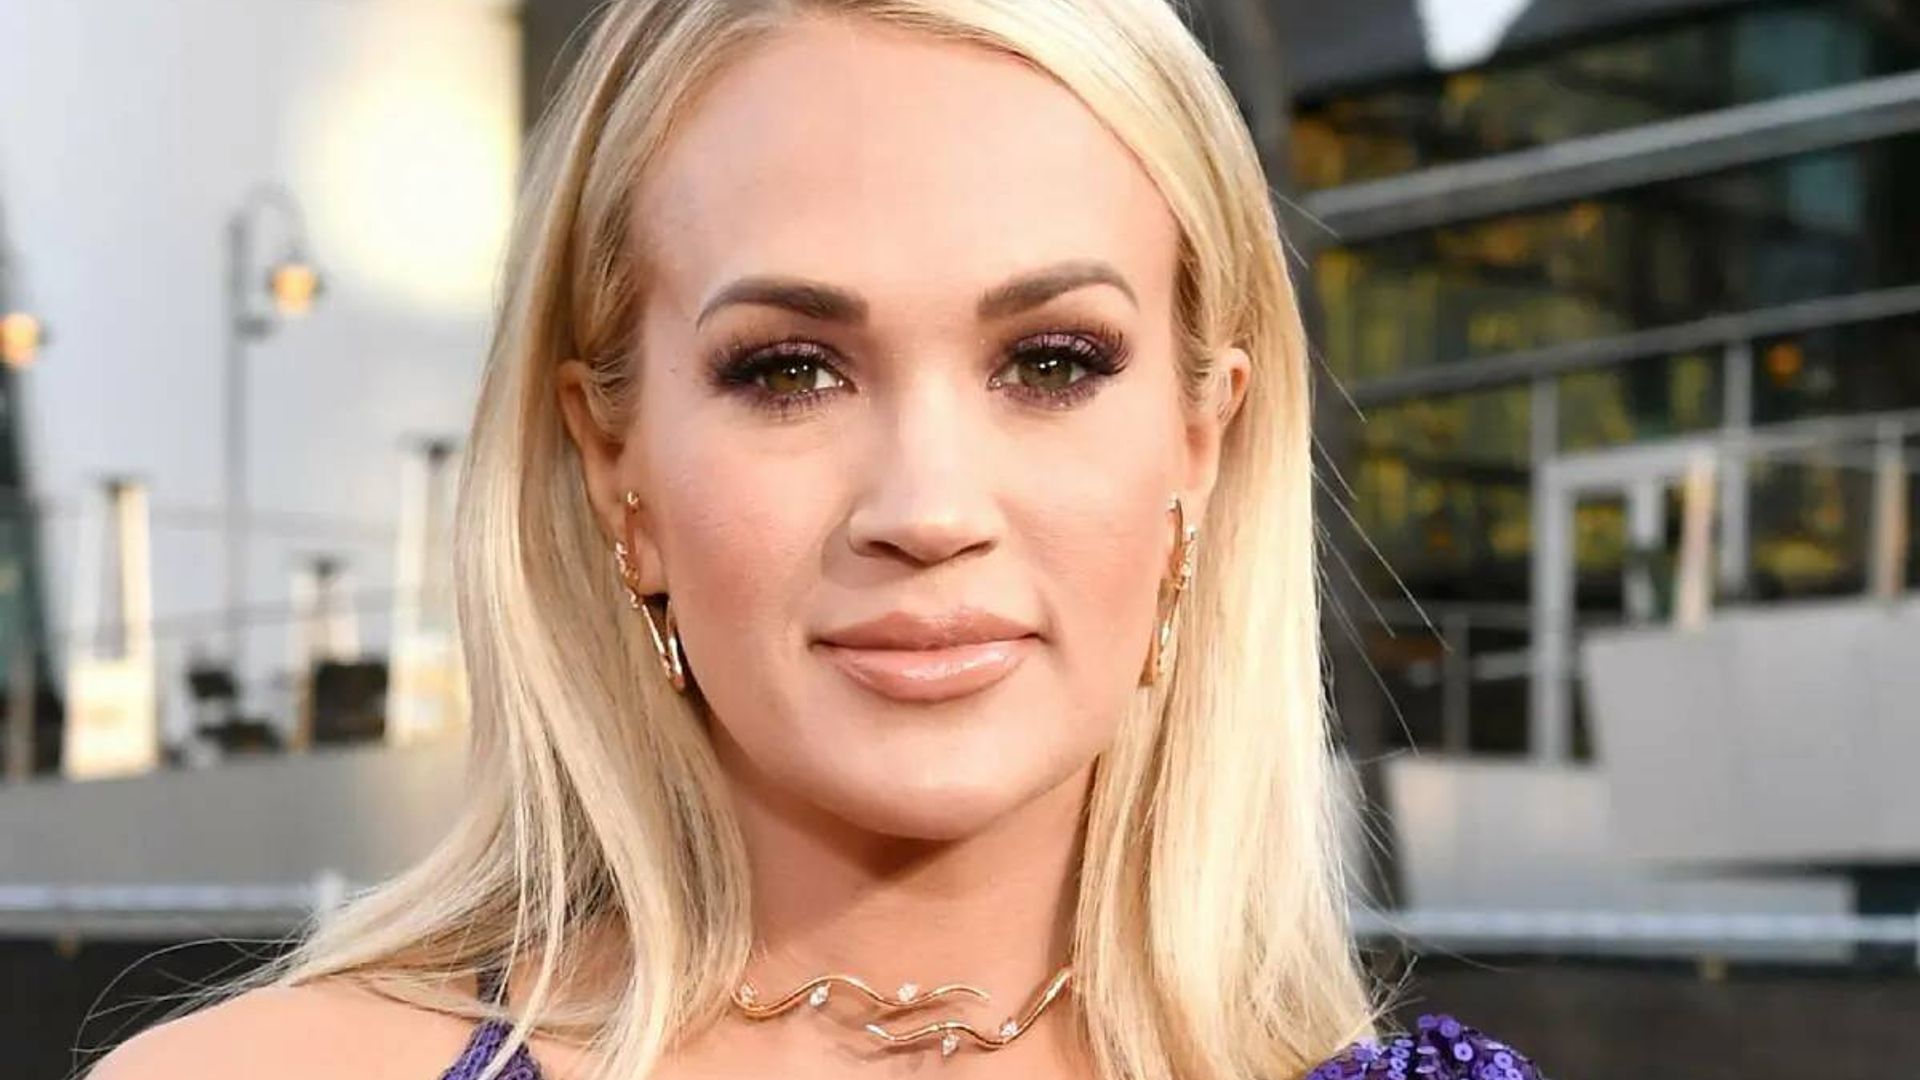 Carrie Underwood's bikini selfie featured an unexpected guest